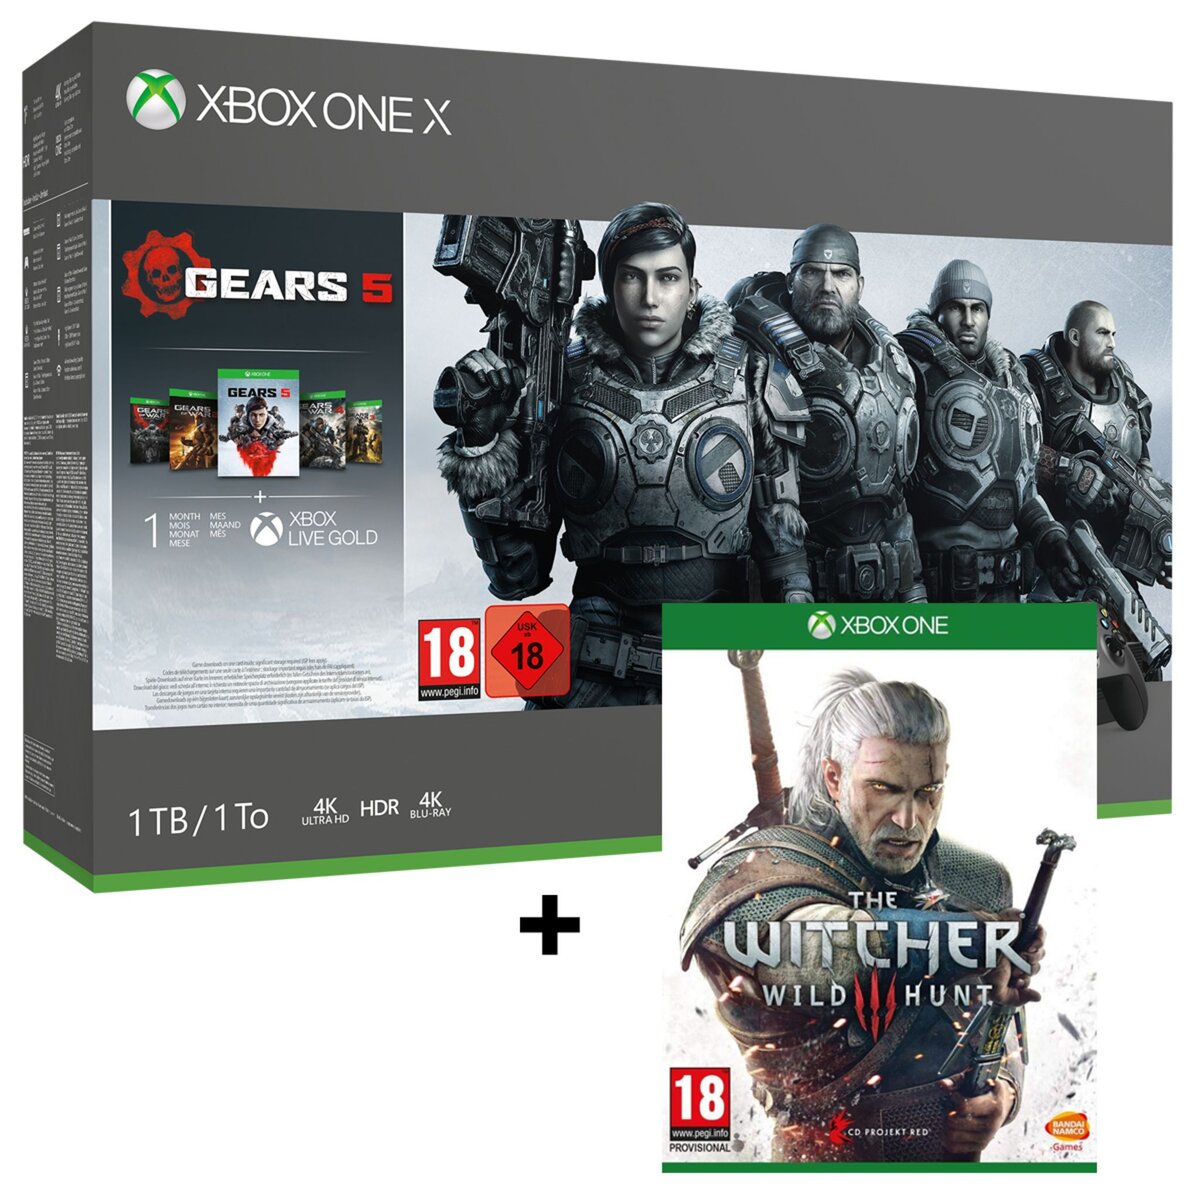 EXCLU WEB Console Xbox One X 1 To Gears 5 + The Witcher 3